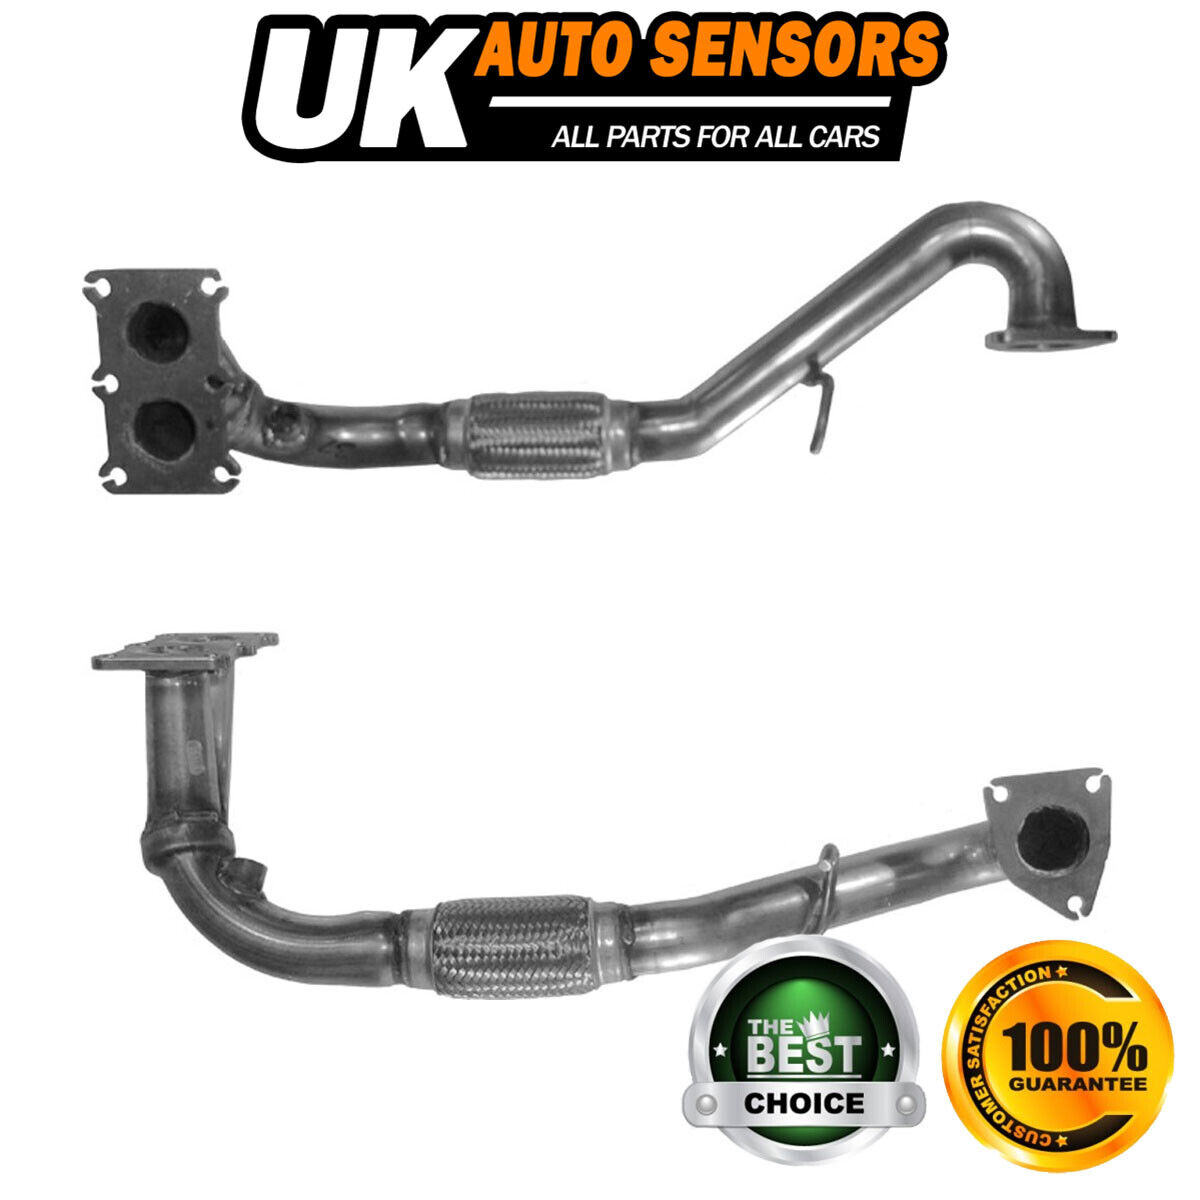 Fits MG MGF 2000-2002 TF 2002-2009 1.6 1.8 Exhaust Pipe Euro 3 Front AST